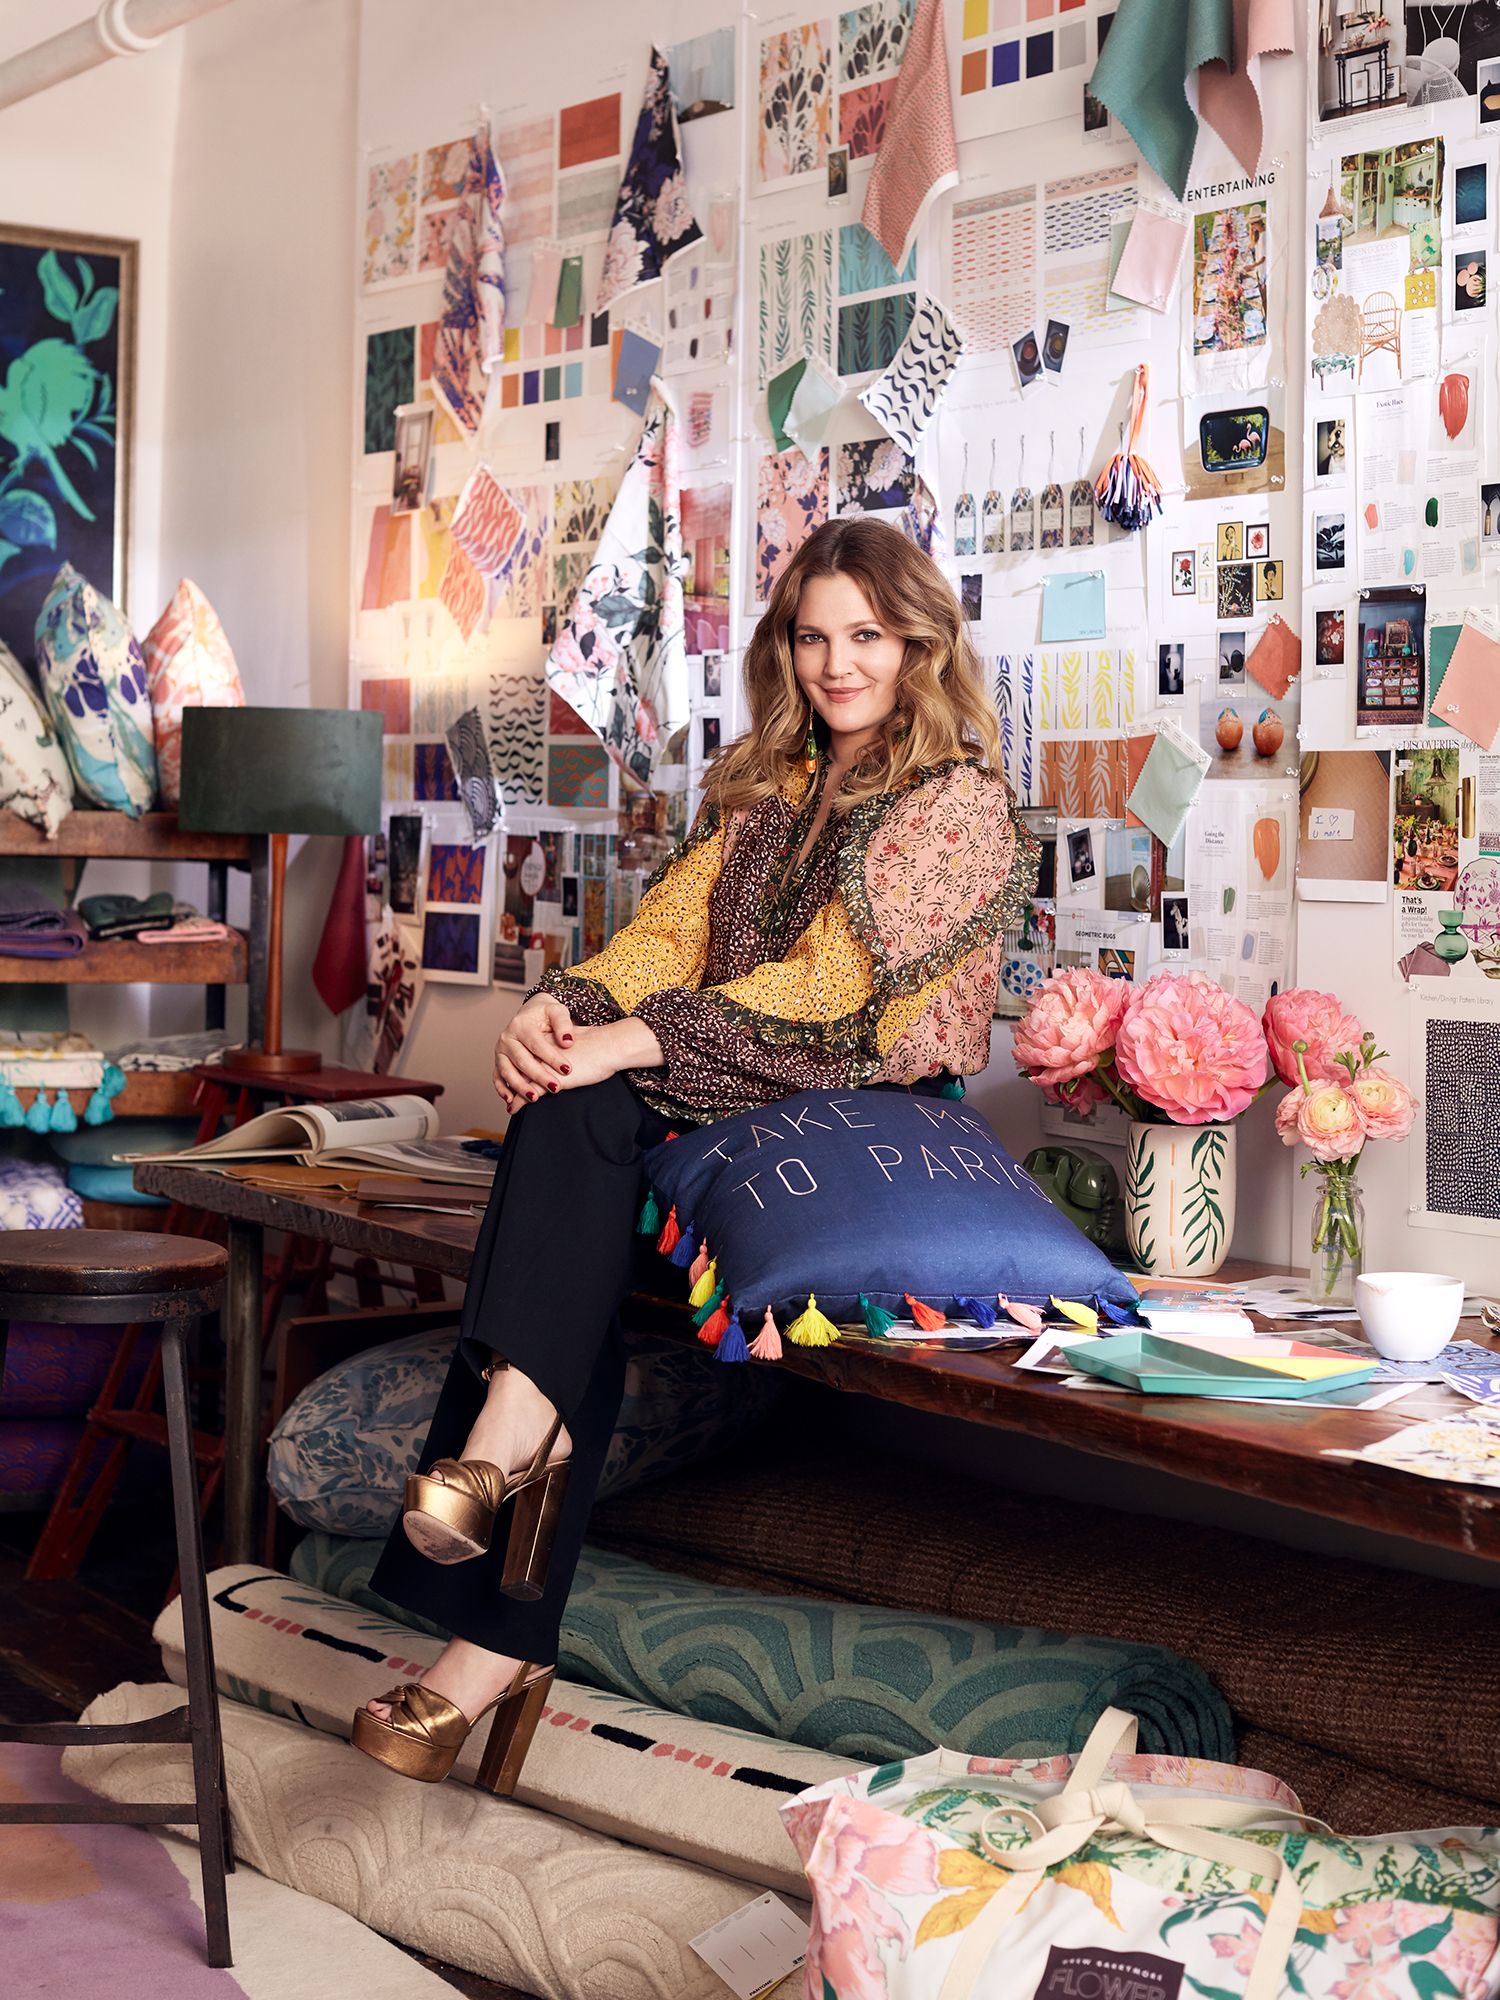 Walmart Adds New Color To Drew Barrymore's Beautiful Collection